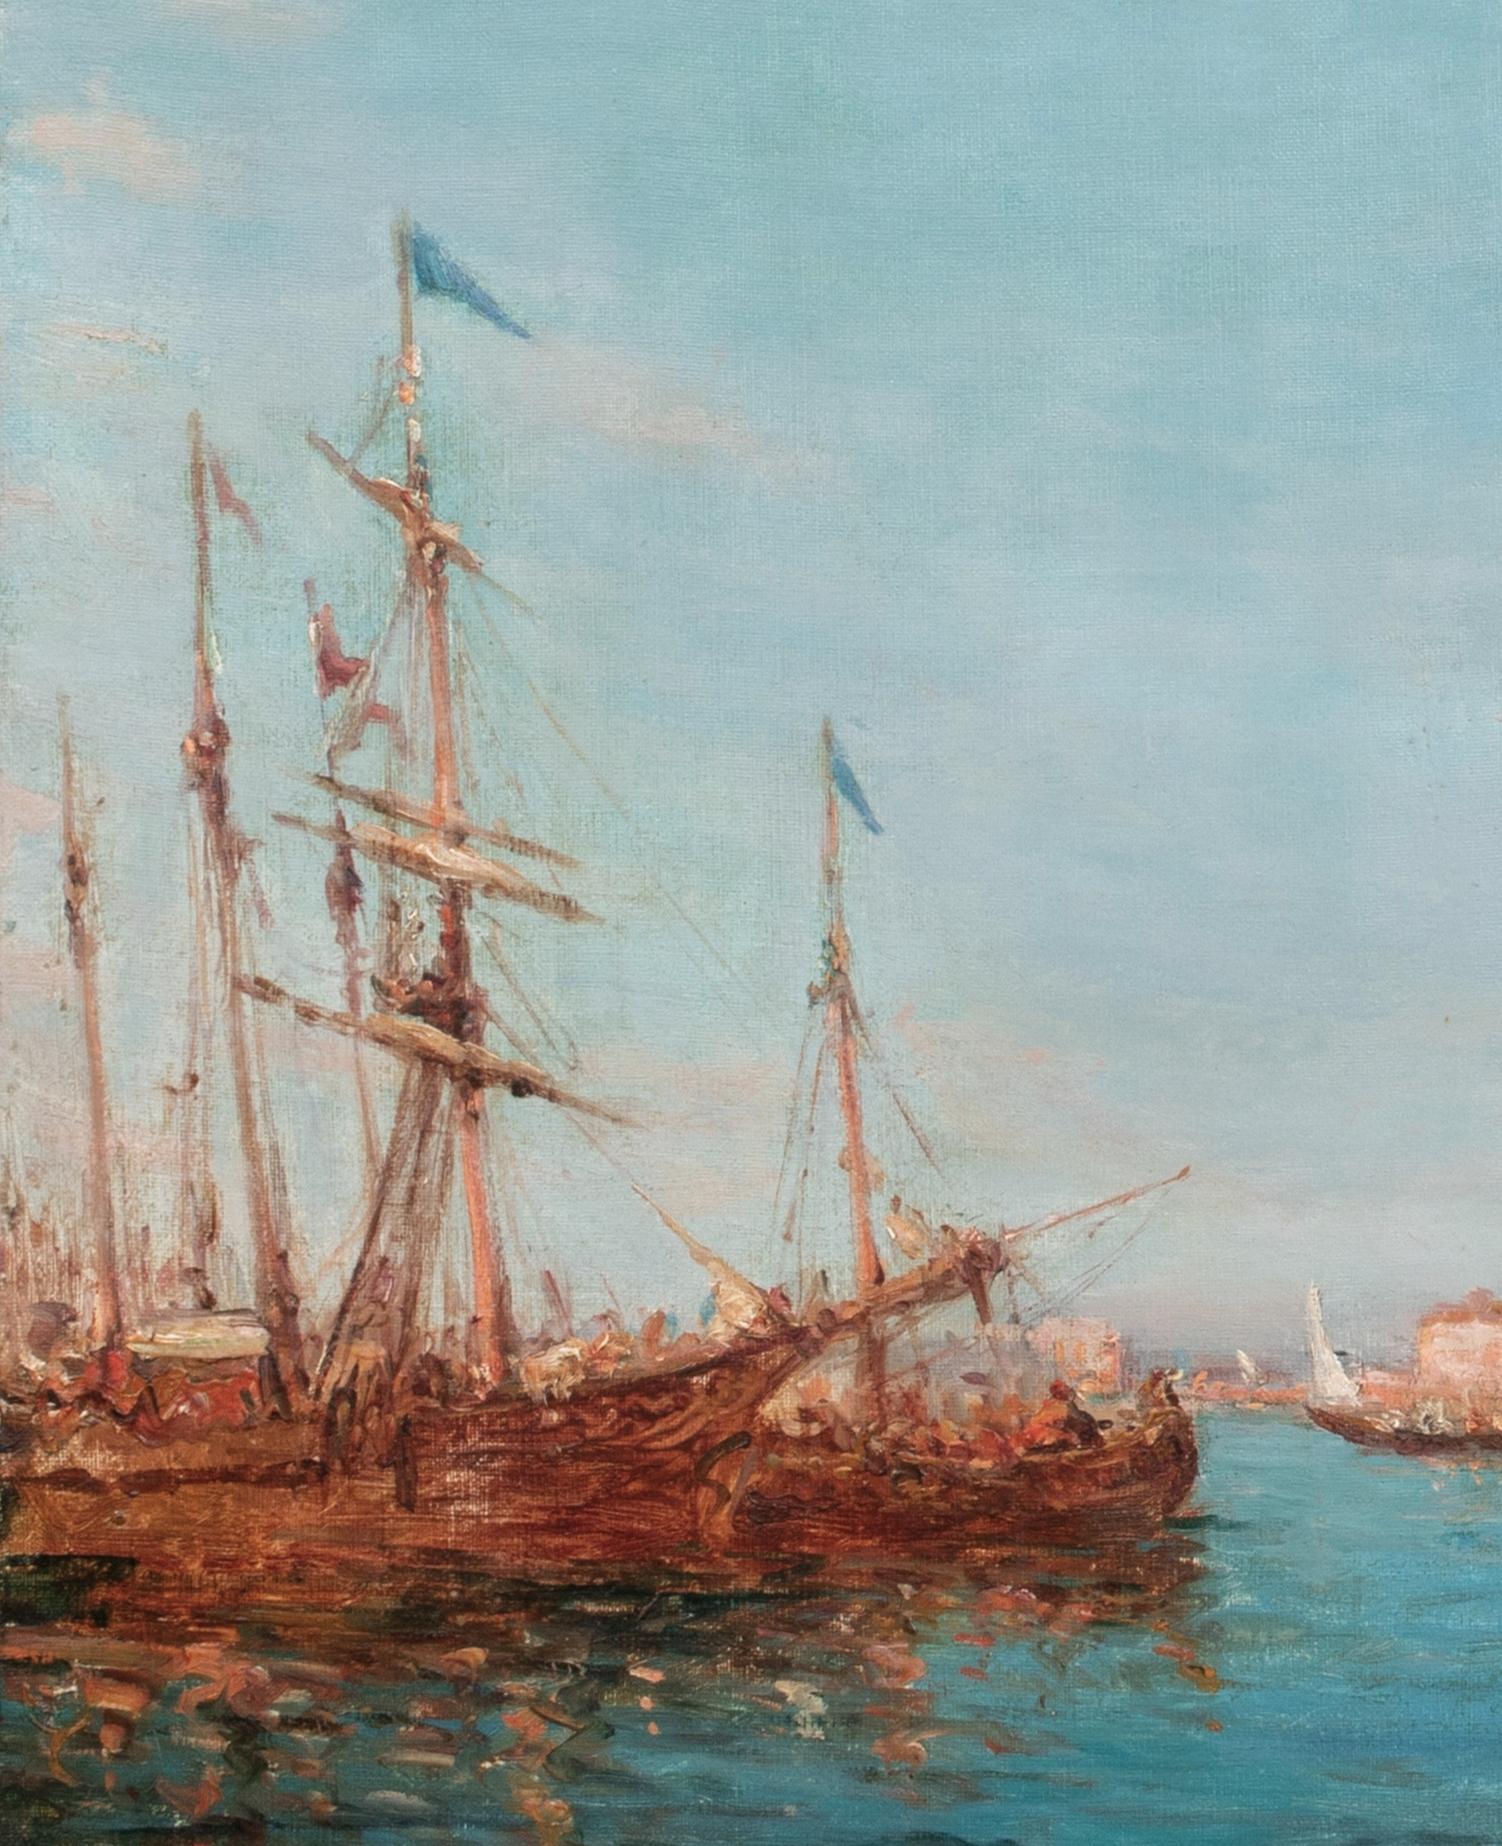 View of Bosphorus, near Istanbul, 19th Century

Signed Indistinctly - Italian School - ONE OF A MATCHING PAIR

Large 19th Italian School view of boats of Bosphorus, Istanbul, oil on canvas. Excellent quality and condition painted in a bright